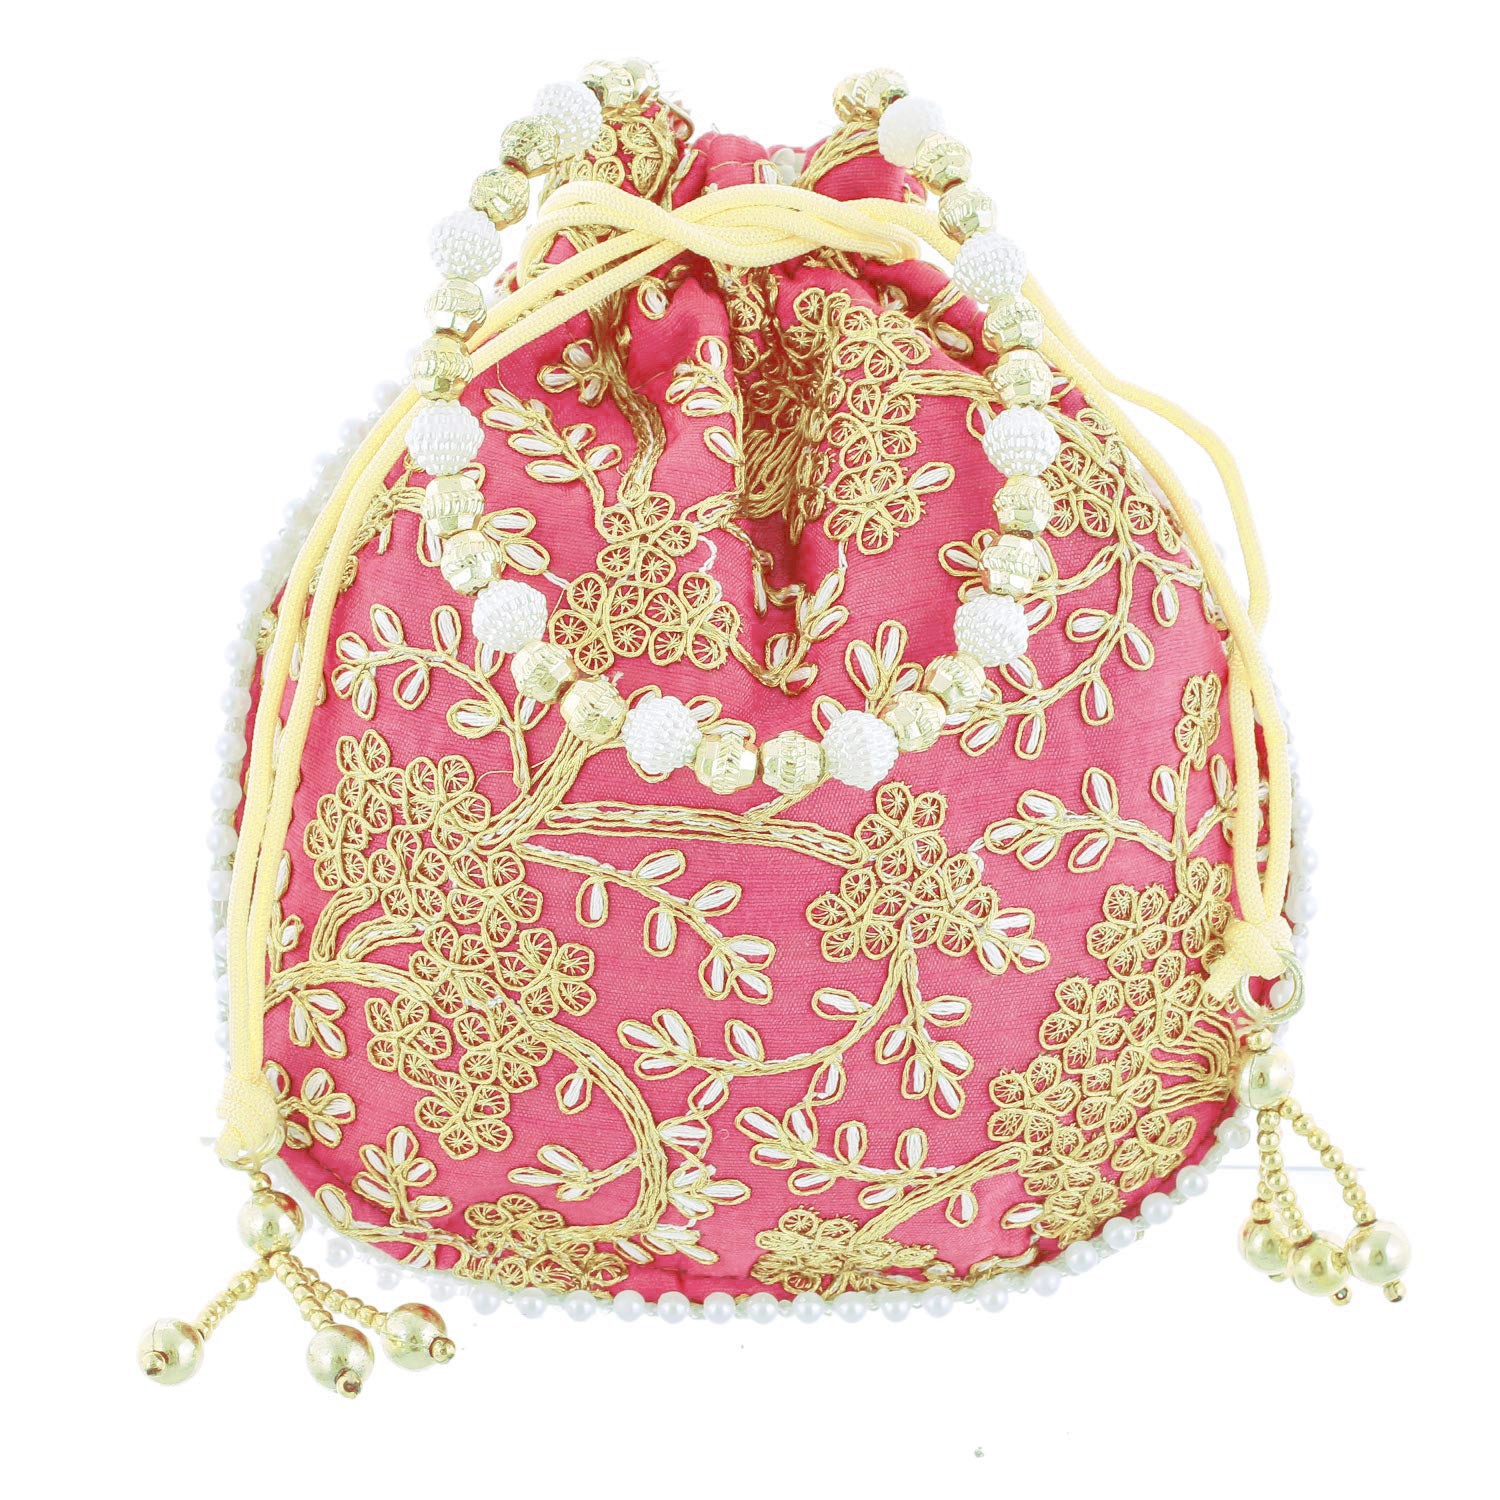 Kuber Industries Embroidery Drawstring Potli|Hand Purse With Gold Pearl Border & Handle For Woman,Girls (Light Pink)